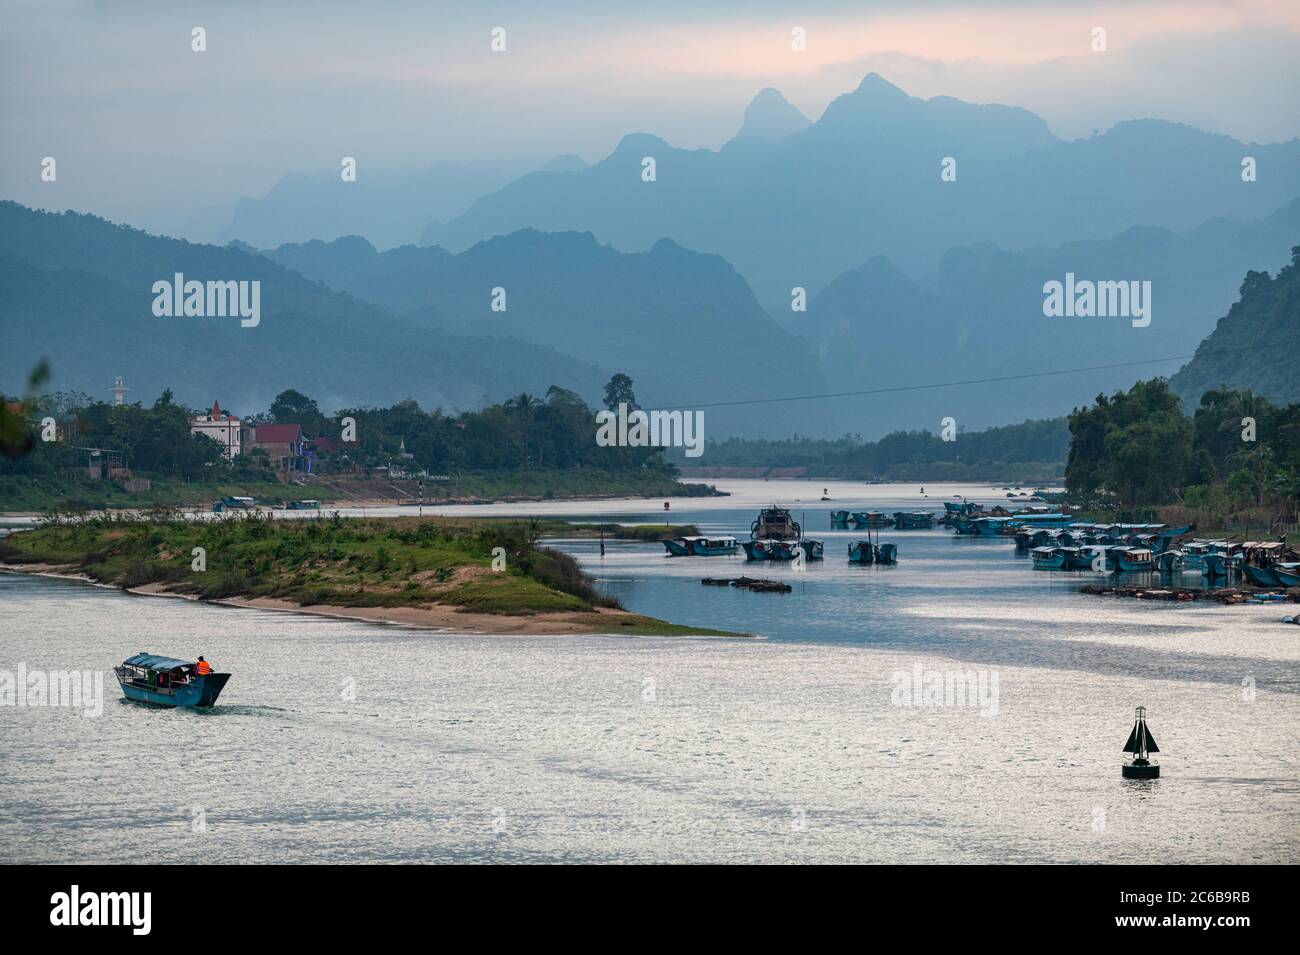 River boat on the Song Con River with the limestone mountains in the background, Phong Nha-Ke Bang National Park, UNESCO World Heritage Site, Vietnam, Stock Photo